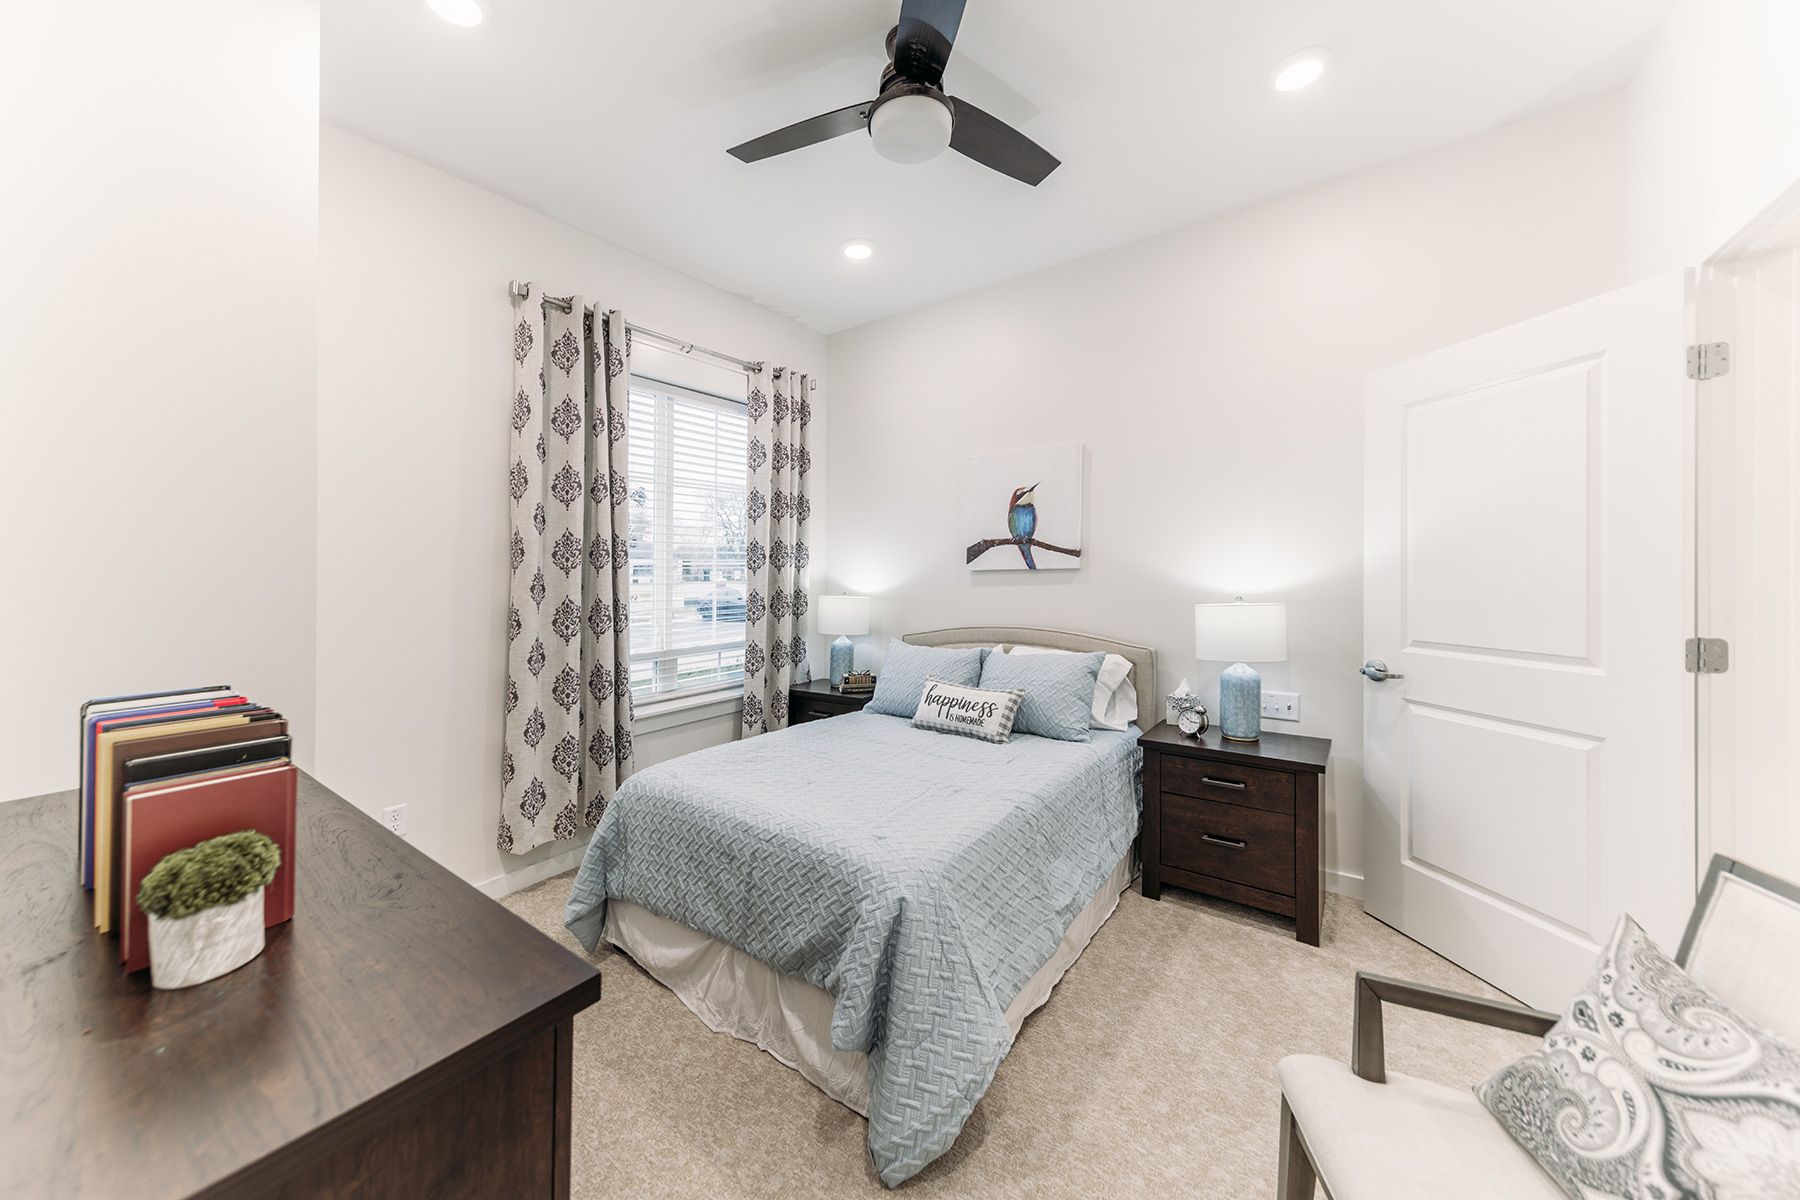 Interior view of a bedroom at The Capstone at Station Camp senior living community.